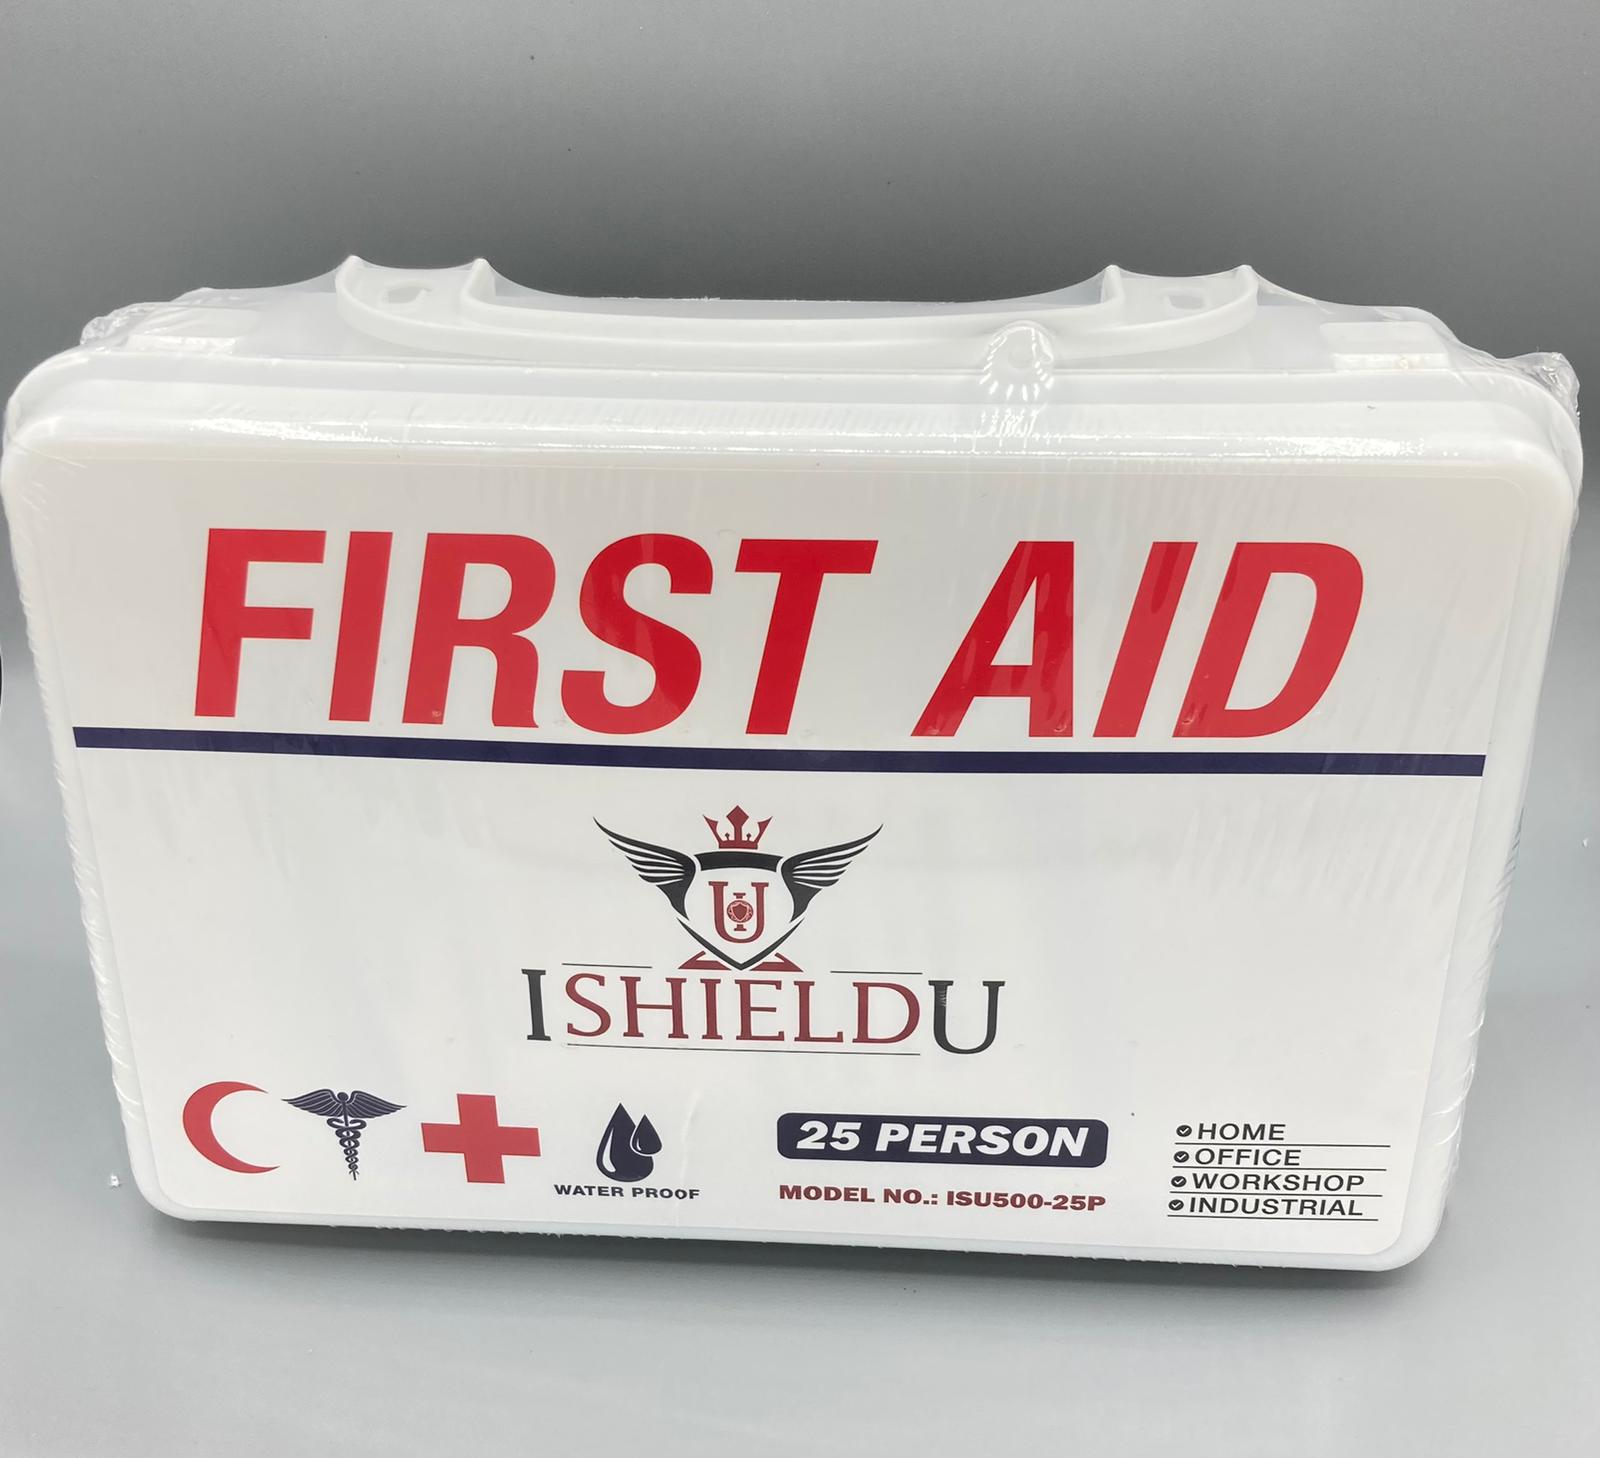 Medical first aid kit for 25 people